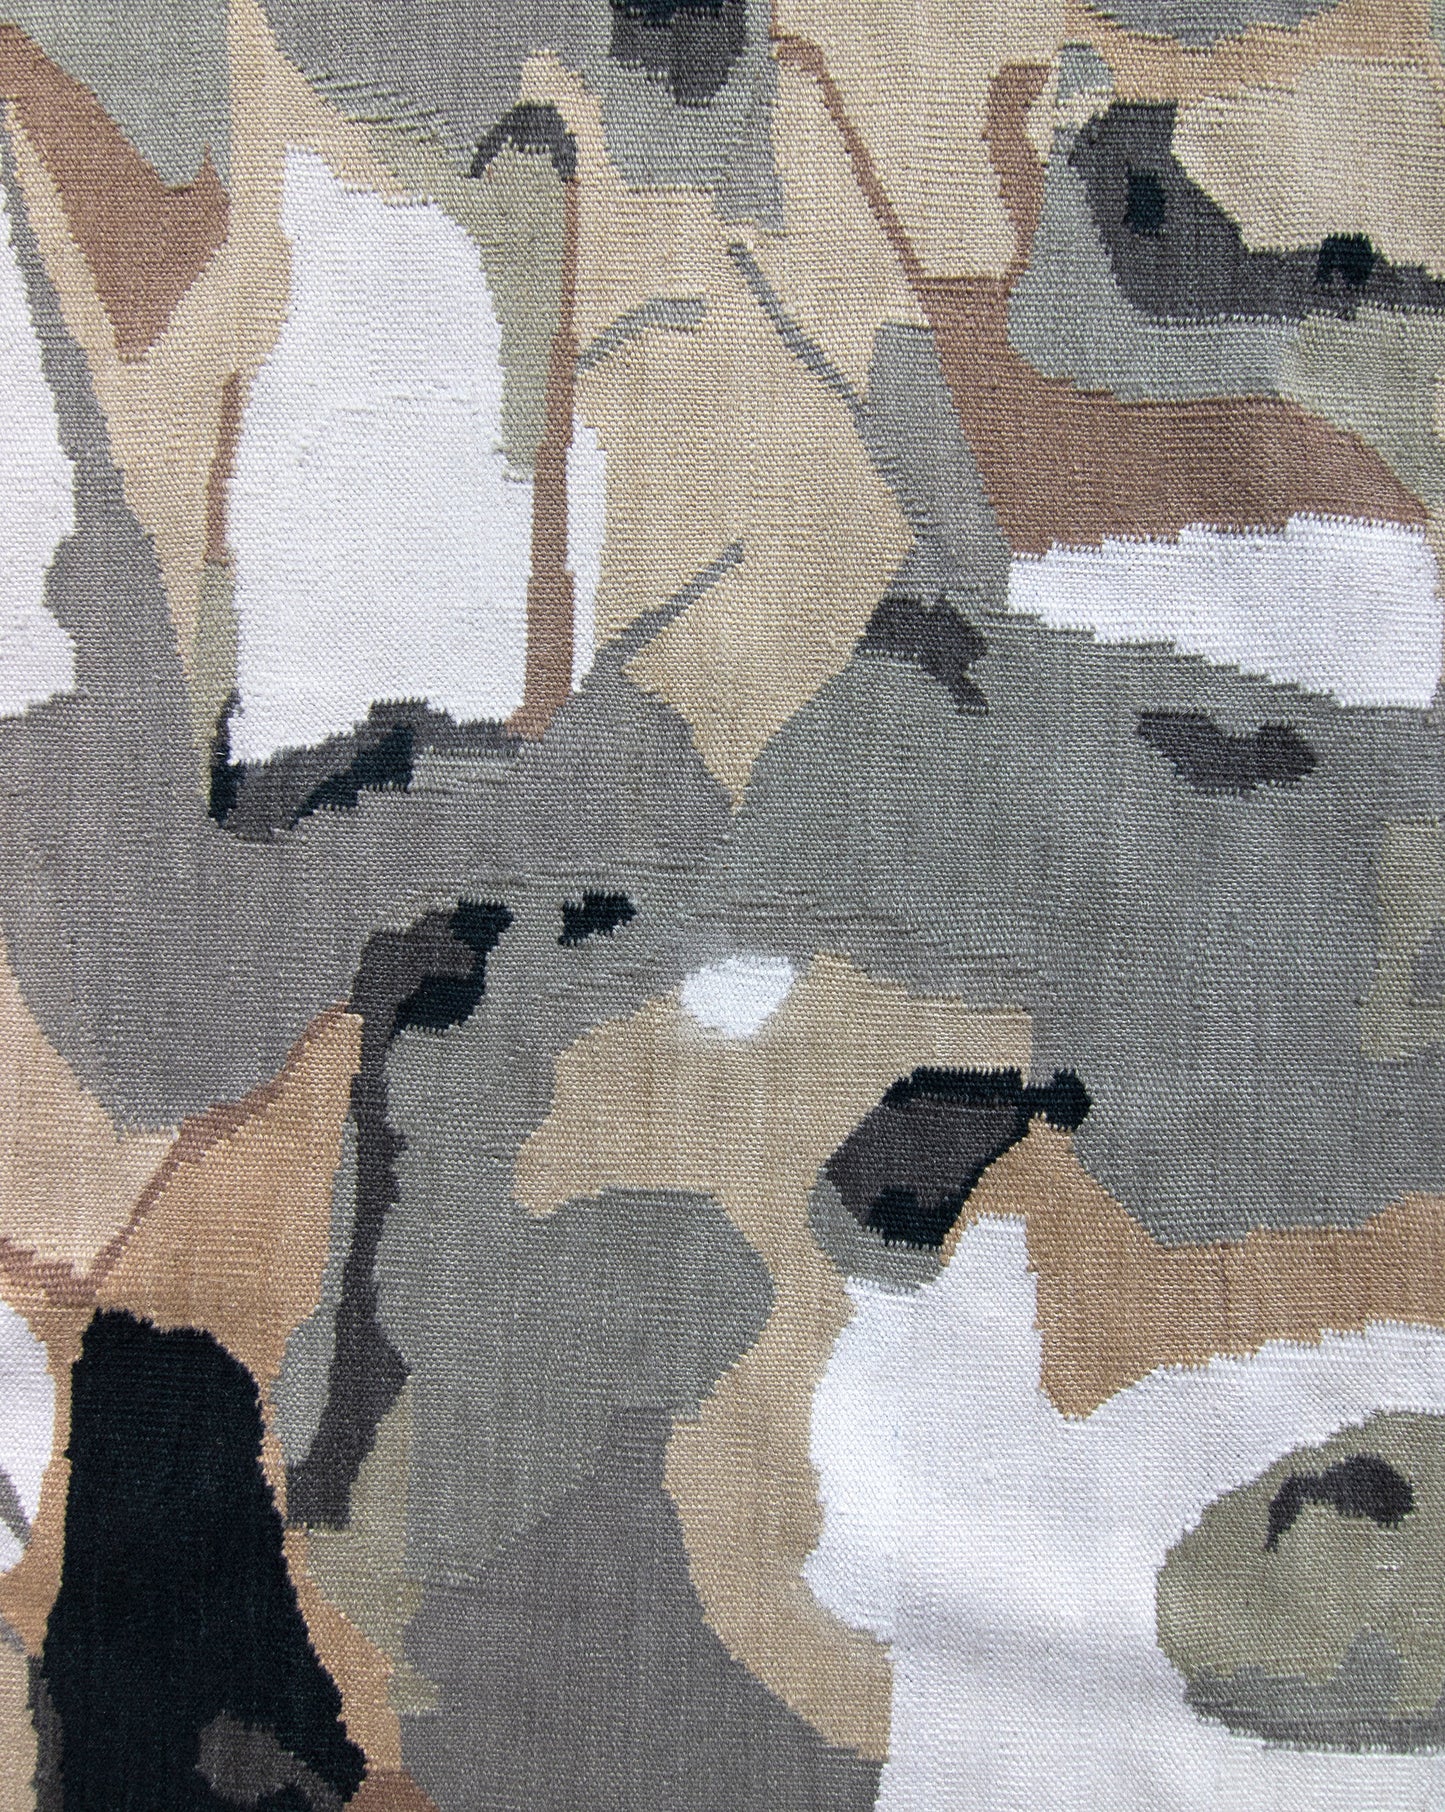 A close up of a Medina Flatweave Rug made from camouflage fabric